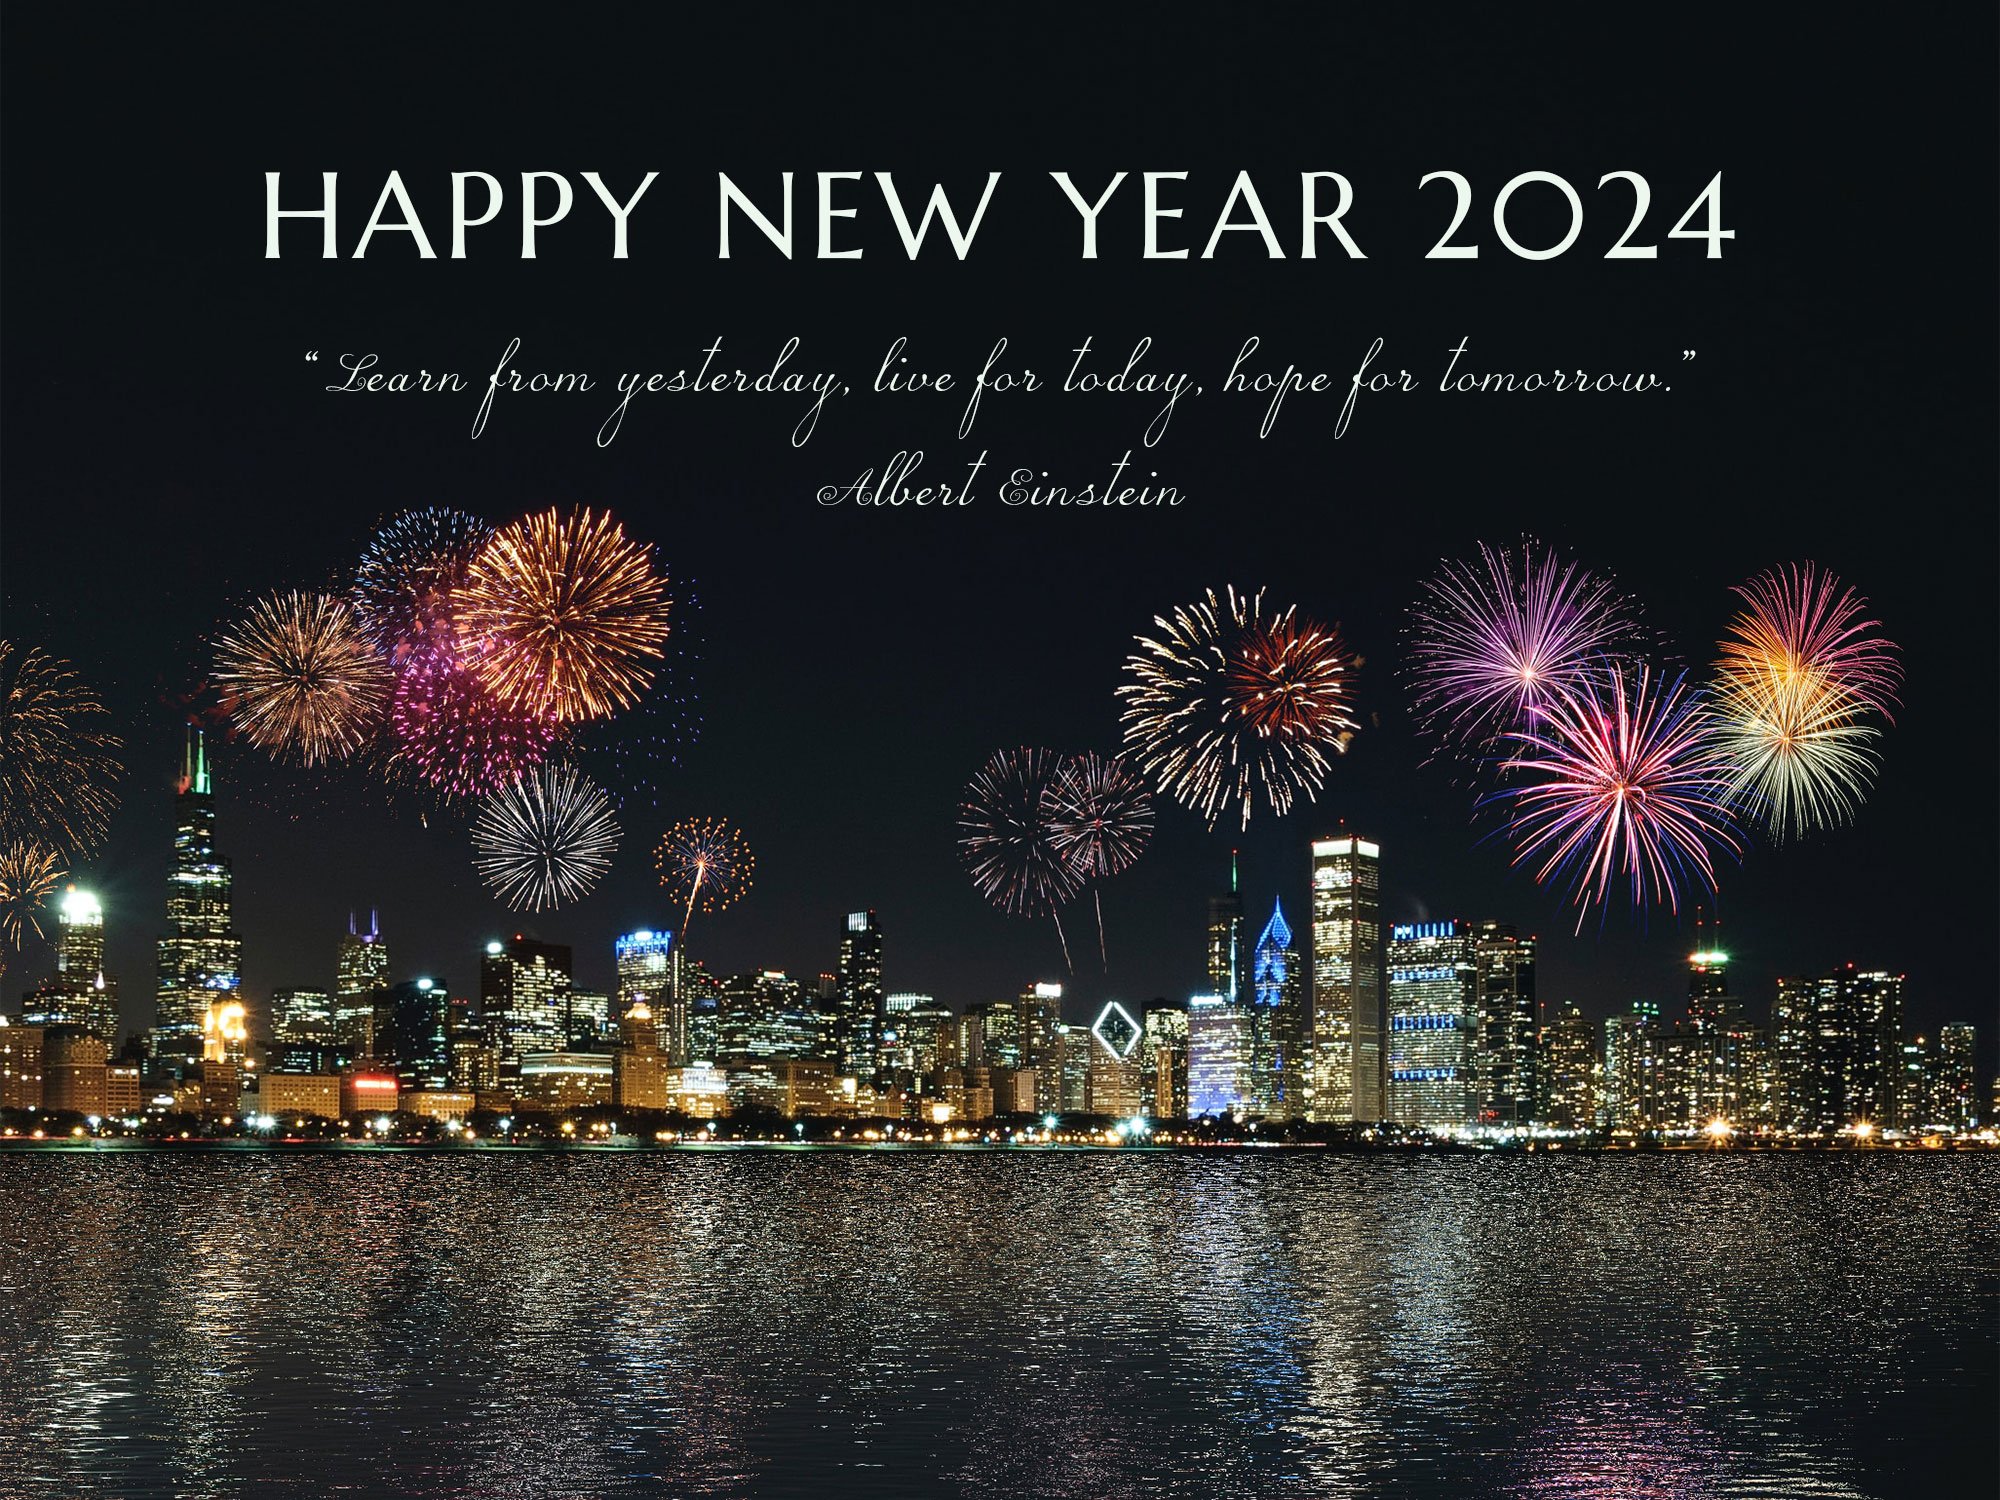 Happy New Year 2024 Image, Background & Wallpaper